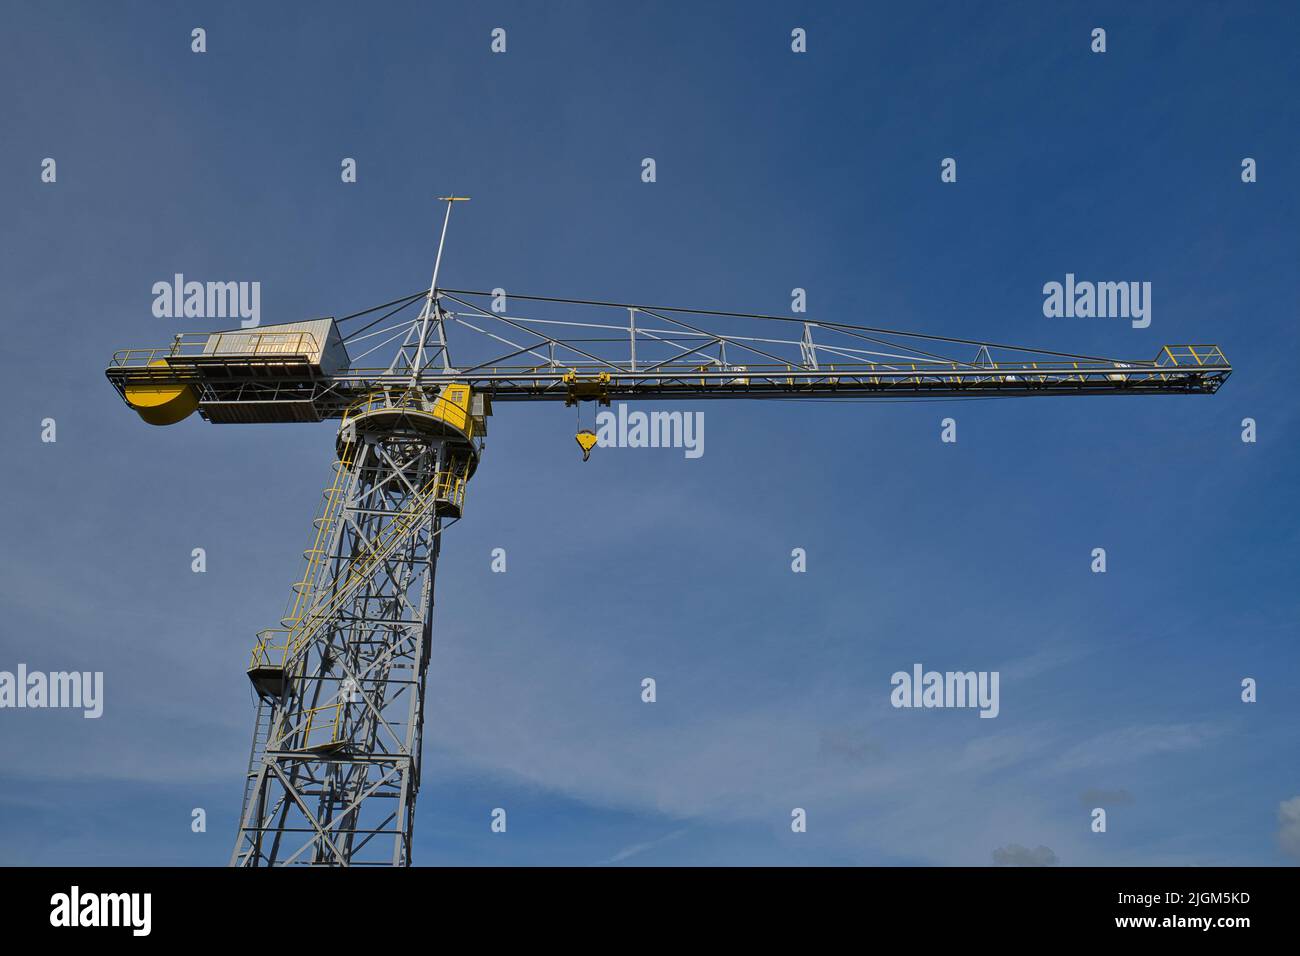 An old port crane in gray and yellow against blue sky Stock Photo